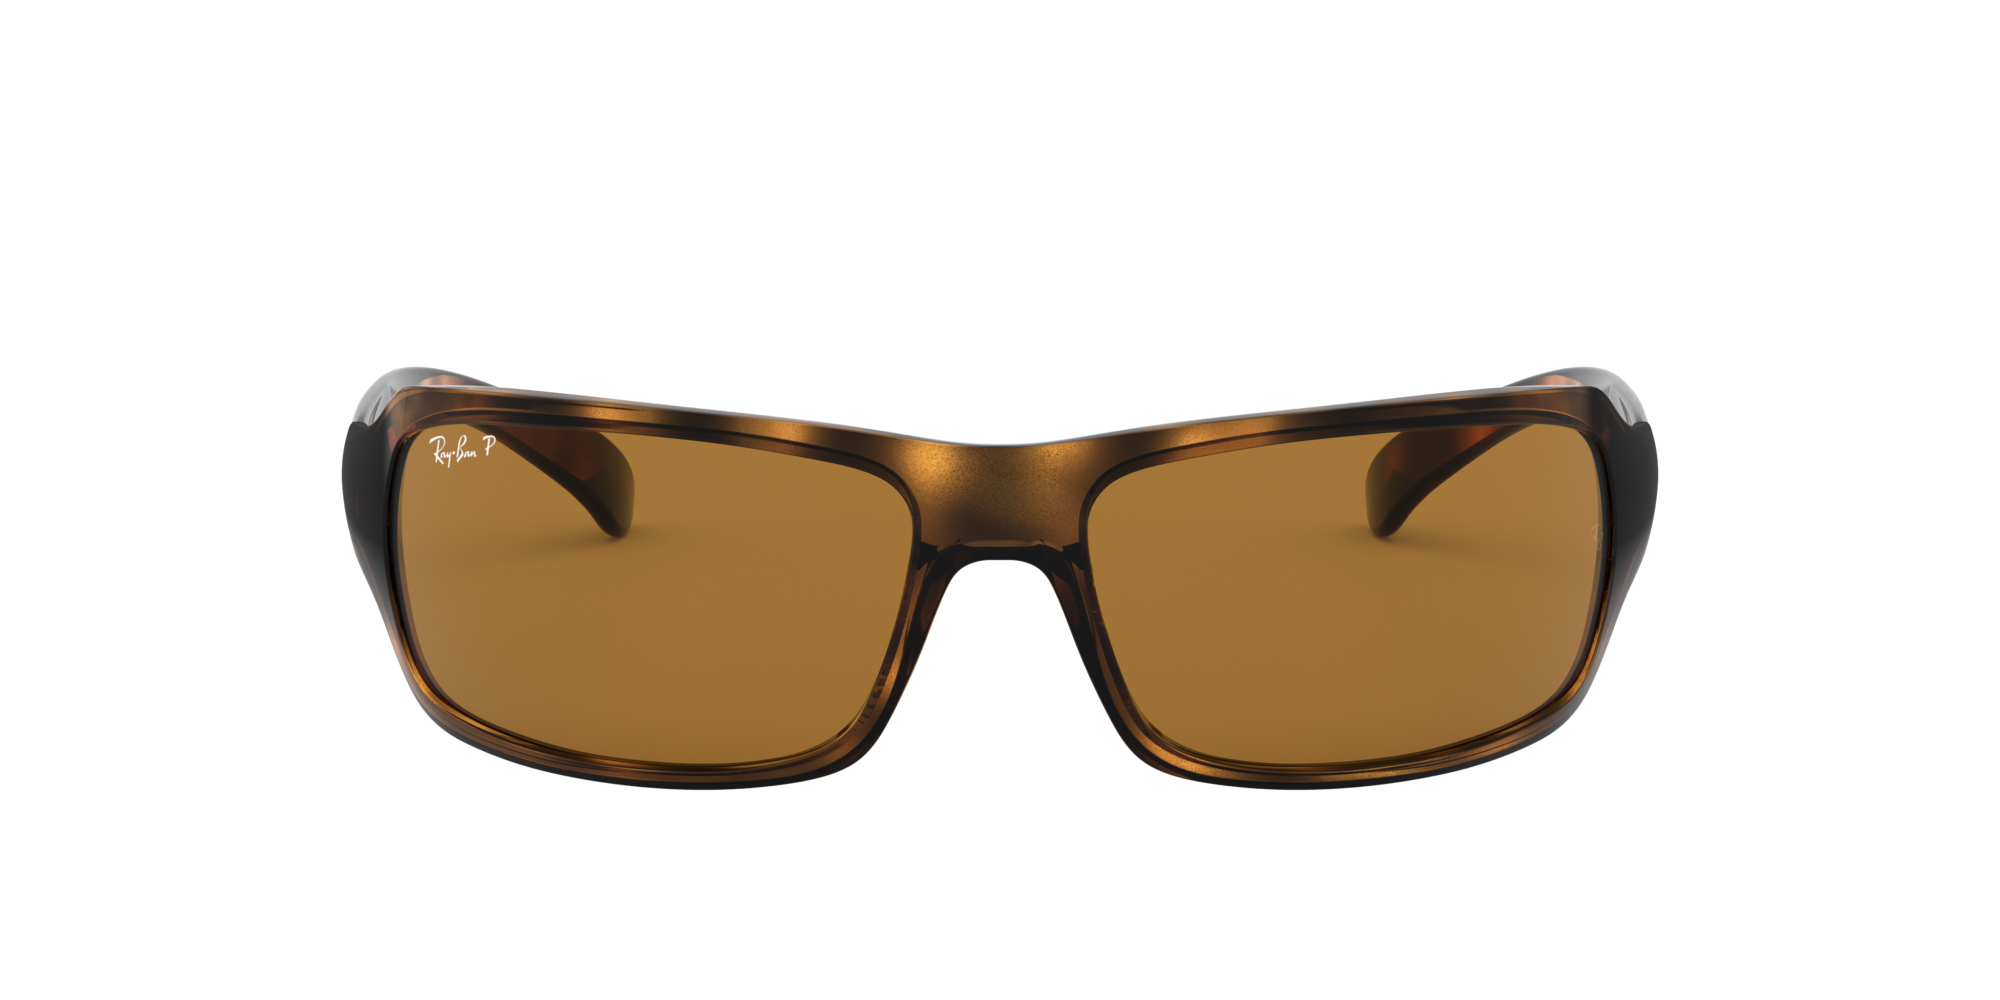 Ray-Ban 0RB4075 in Tortoise Sunglasses 